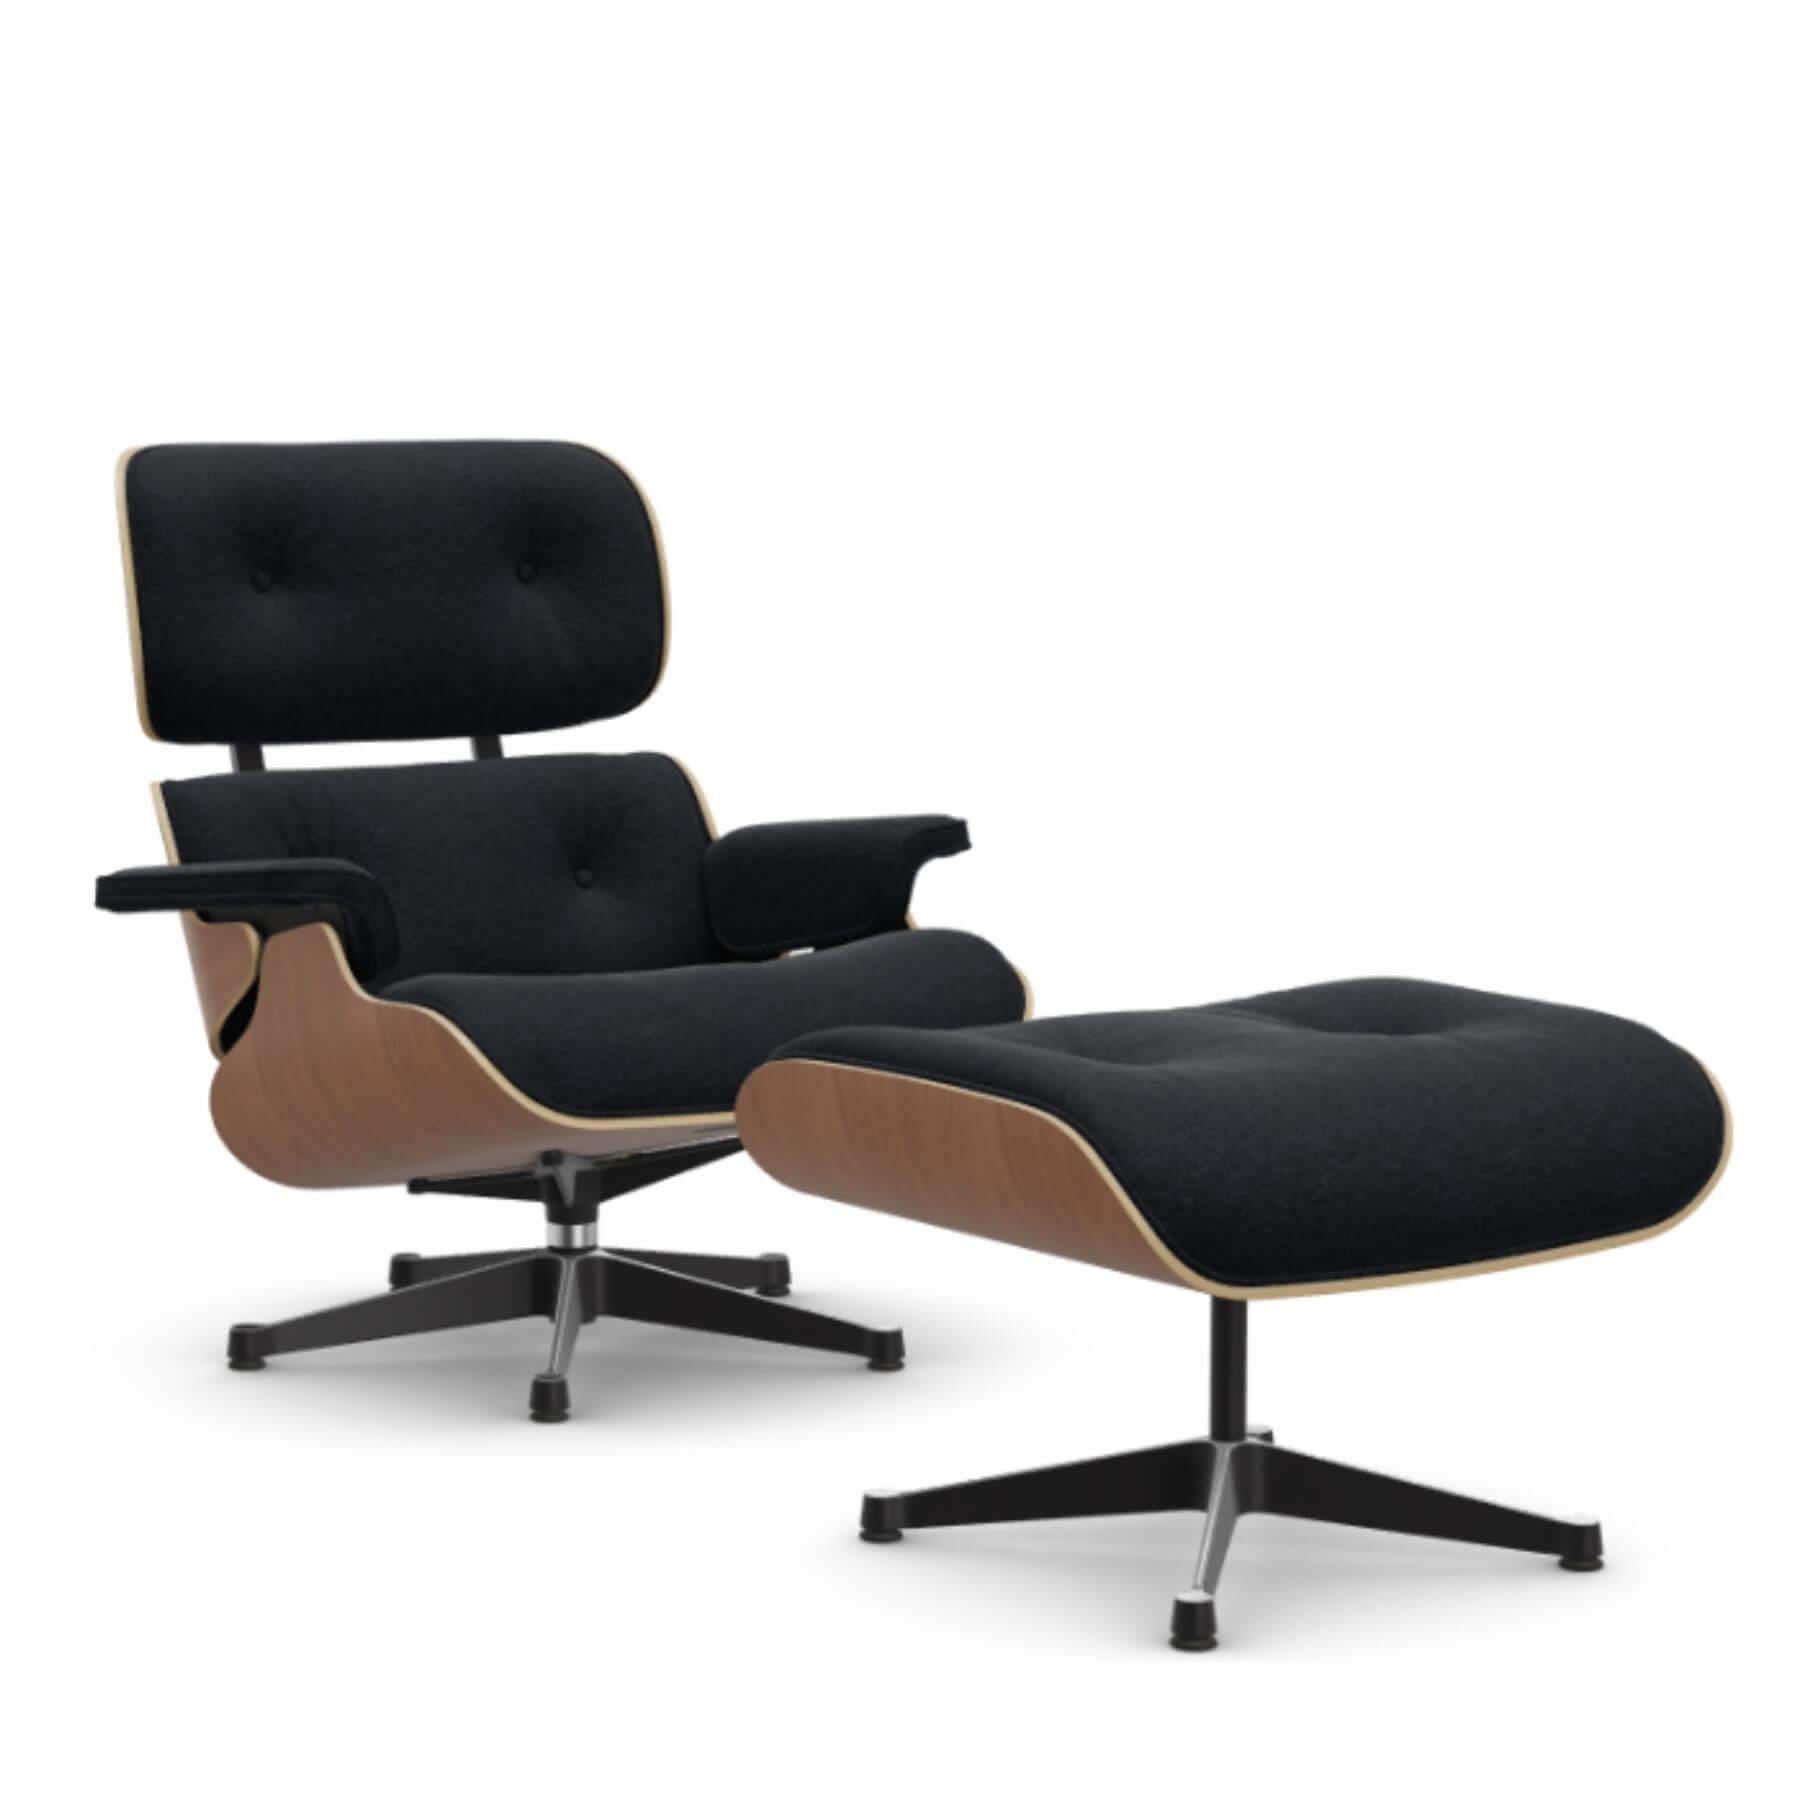 Vitra Eames Lounge Chair American Cherry Nubia Black Anthracite Polished Black With Ottoman Light Wood Designer Furniture From Holloways Of Ludlow